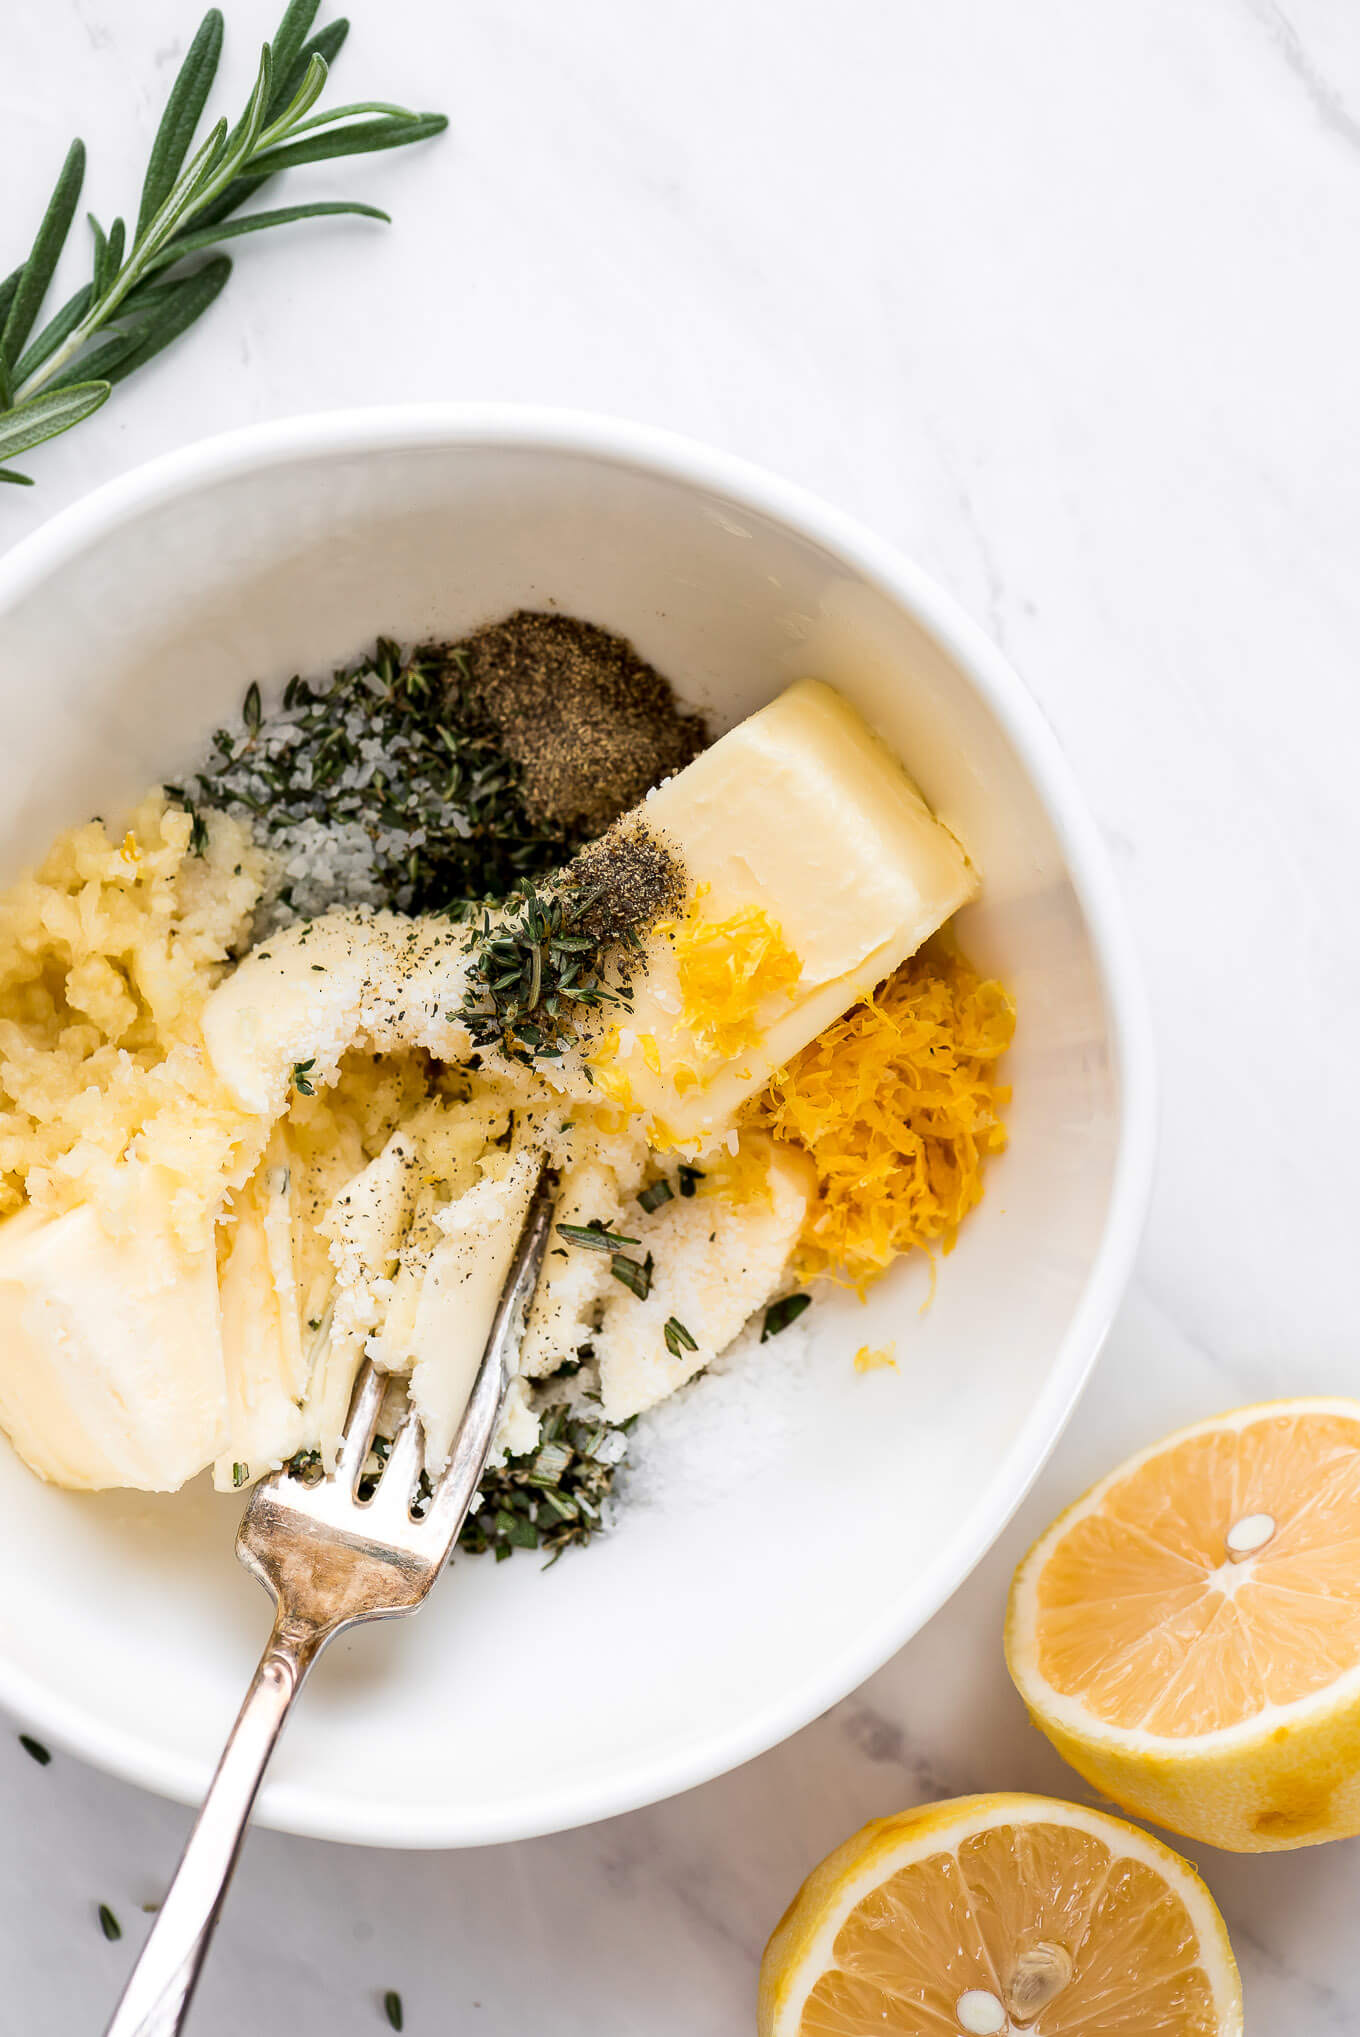 Butter, herbs, garlic, and lemon in a bowl.